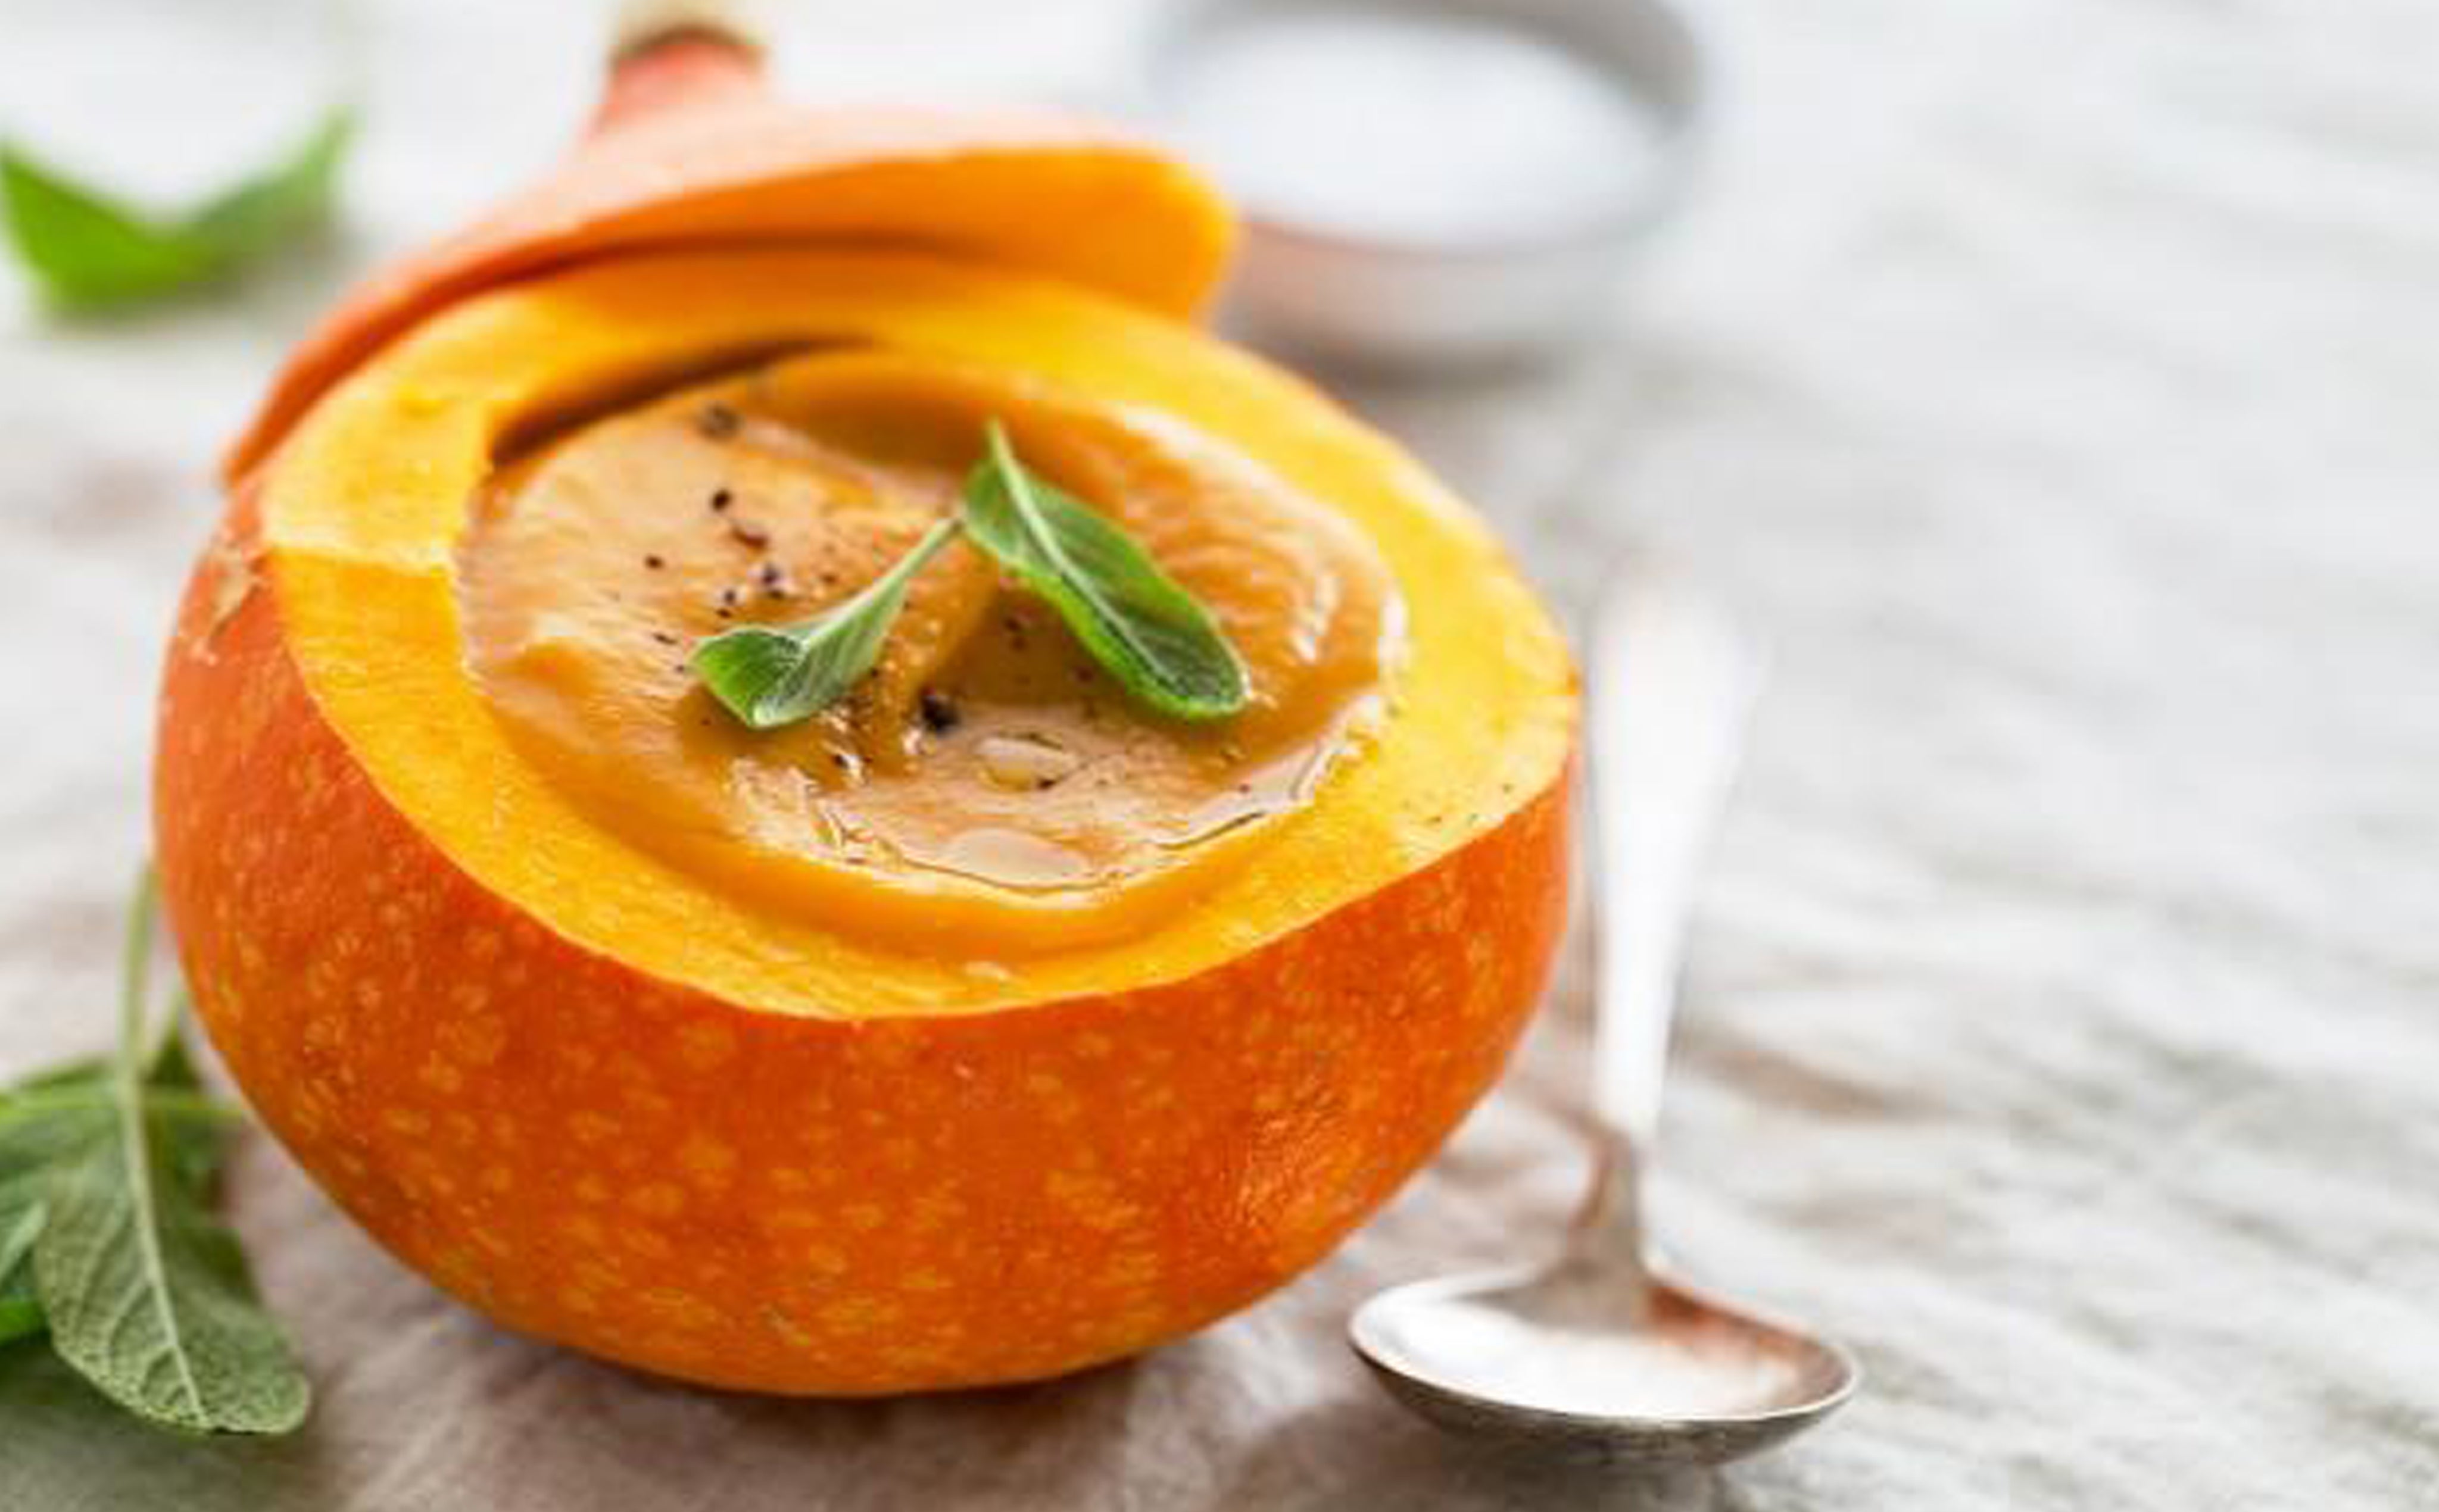 Easy pumpkin recipes for babies and toddlers